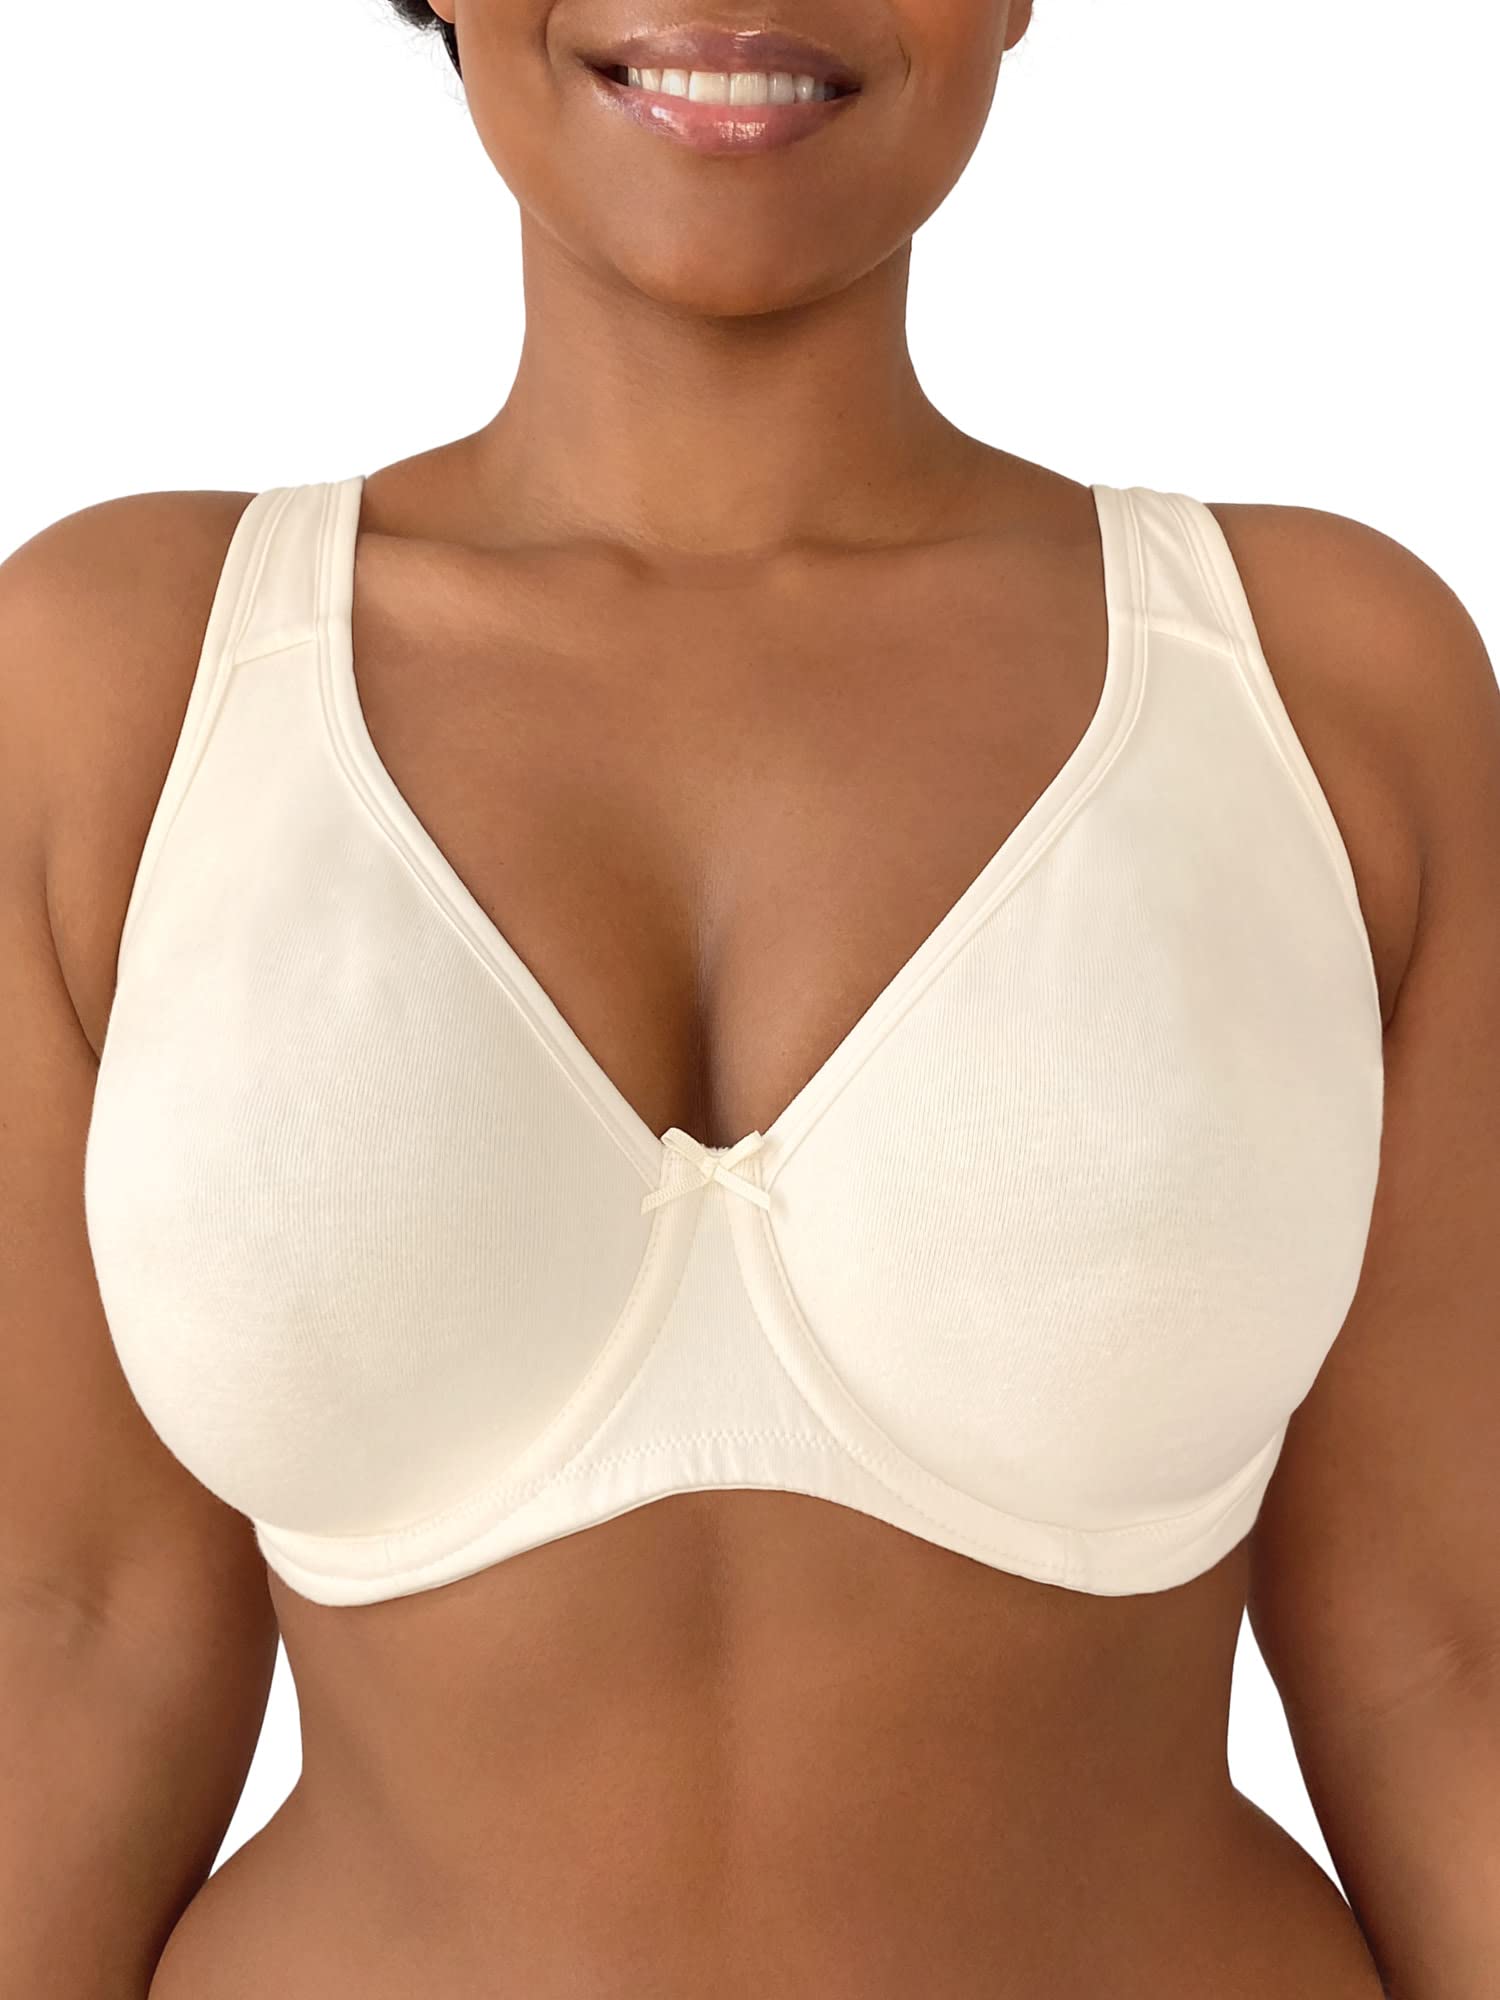 Fruit of the Loom Womens Plus-Size cotton Unlined Underwire Bra, Pristine,  40DDD